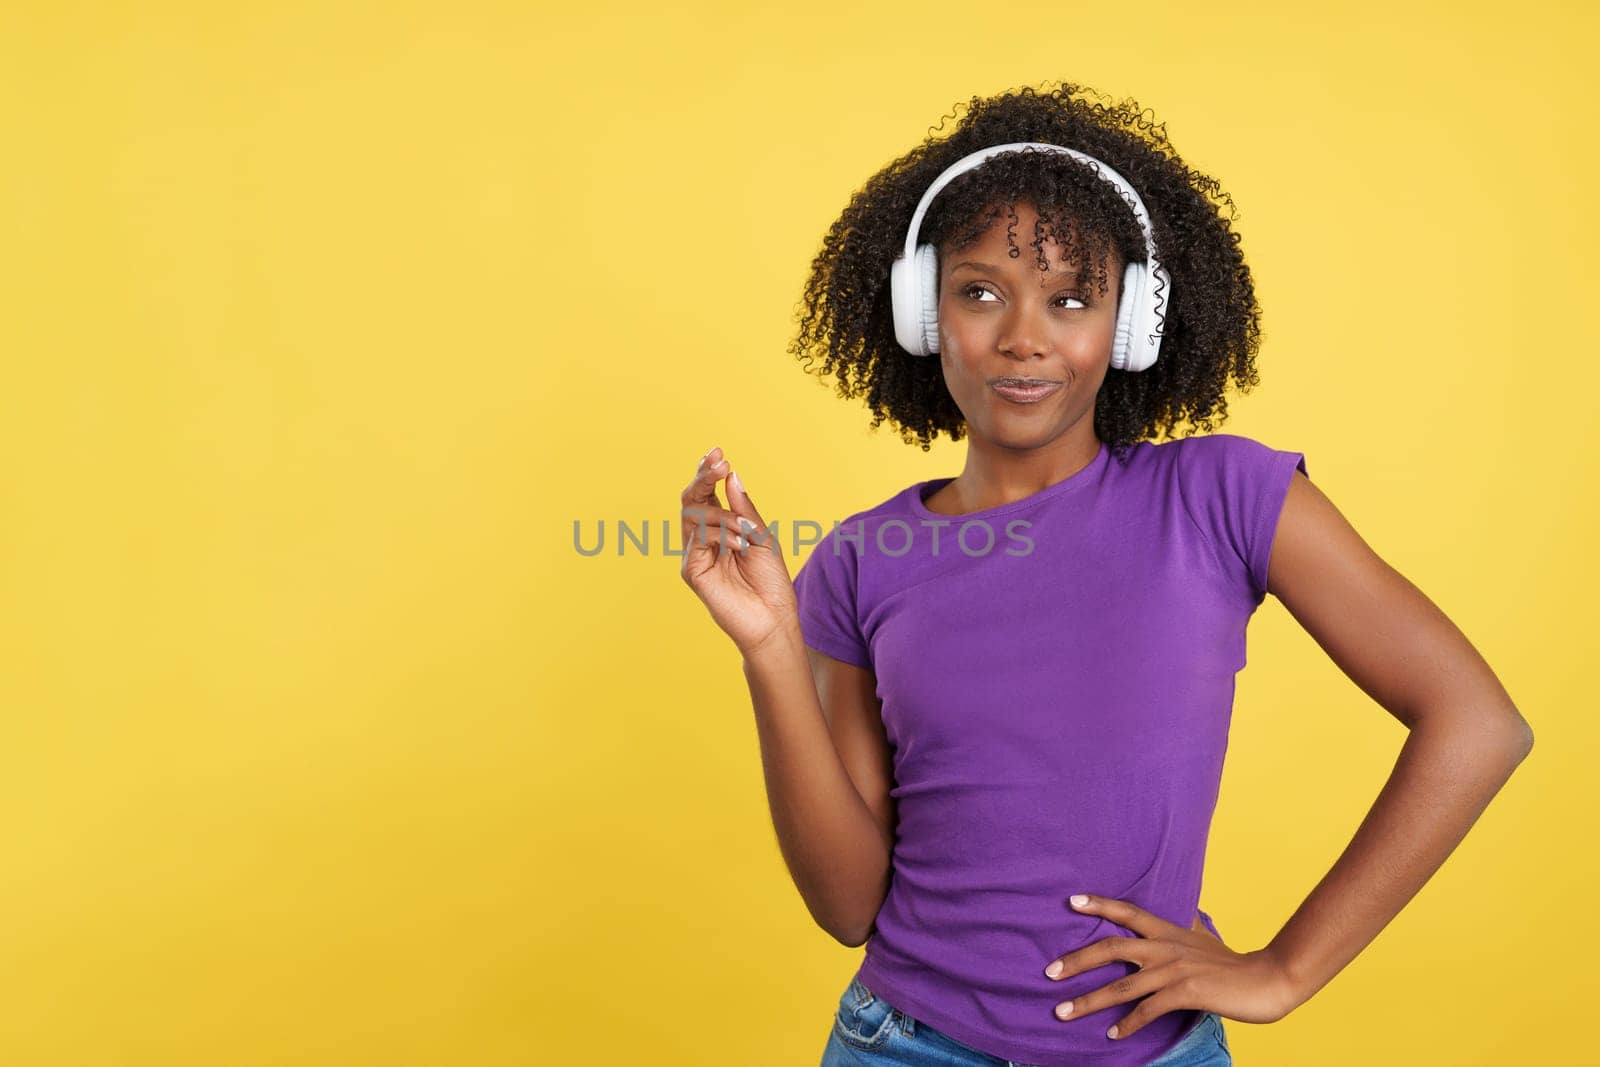 Cool beauty woman with afro hair listening to music with headphones in studio with yellow background